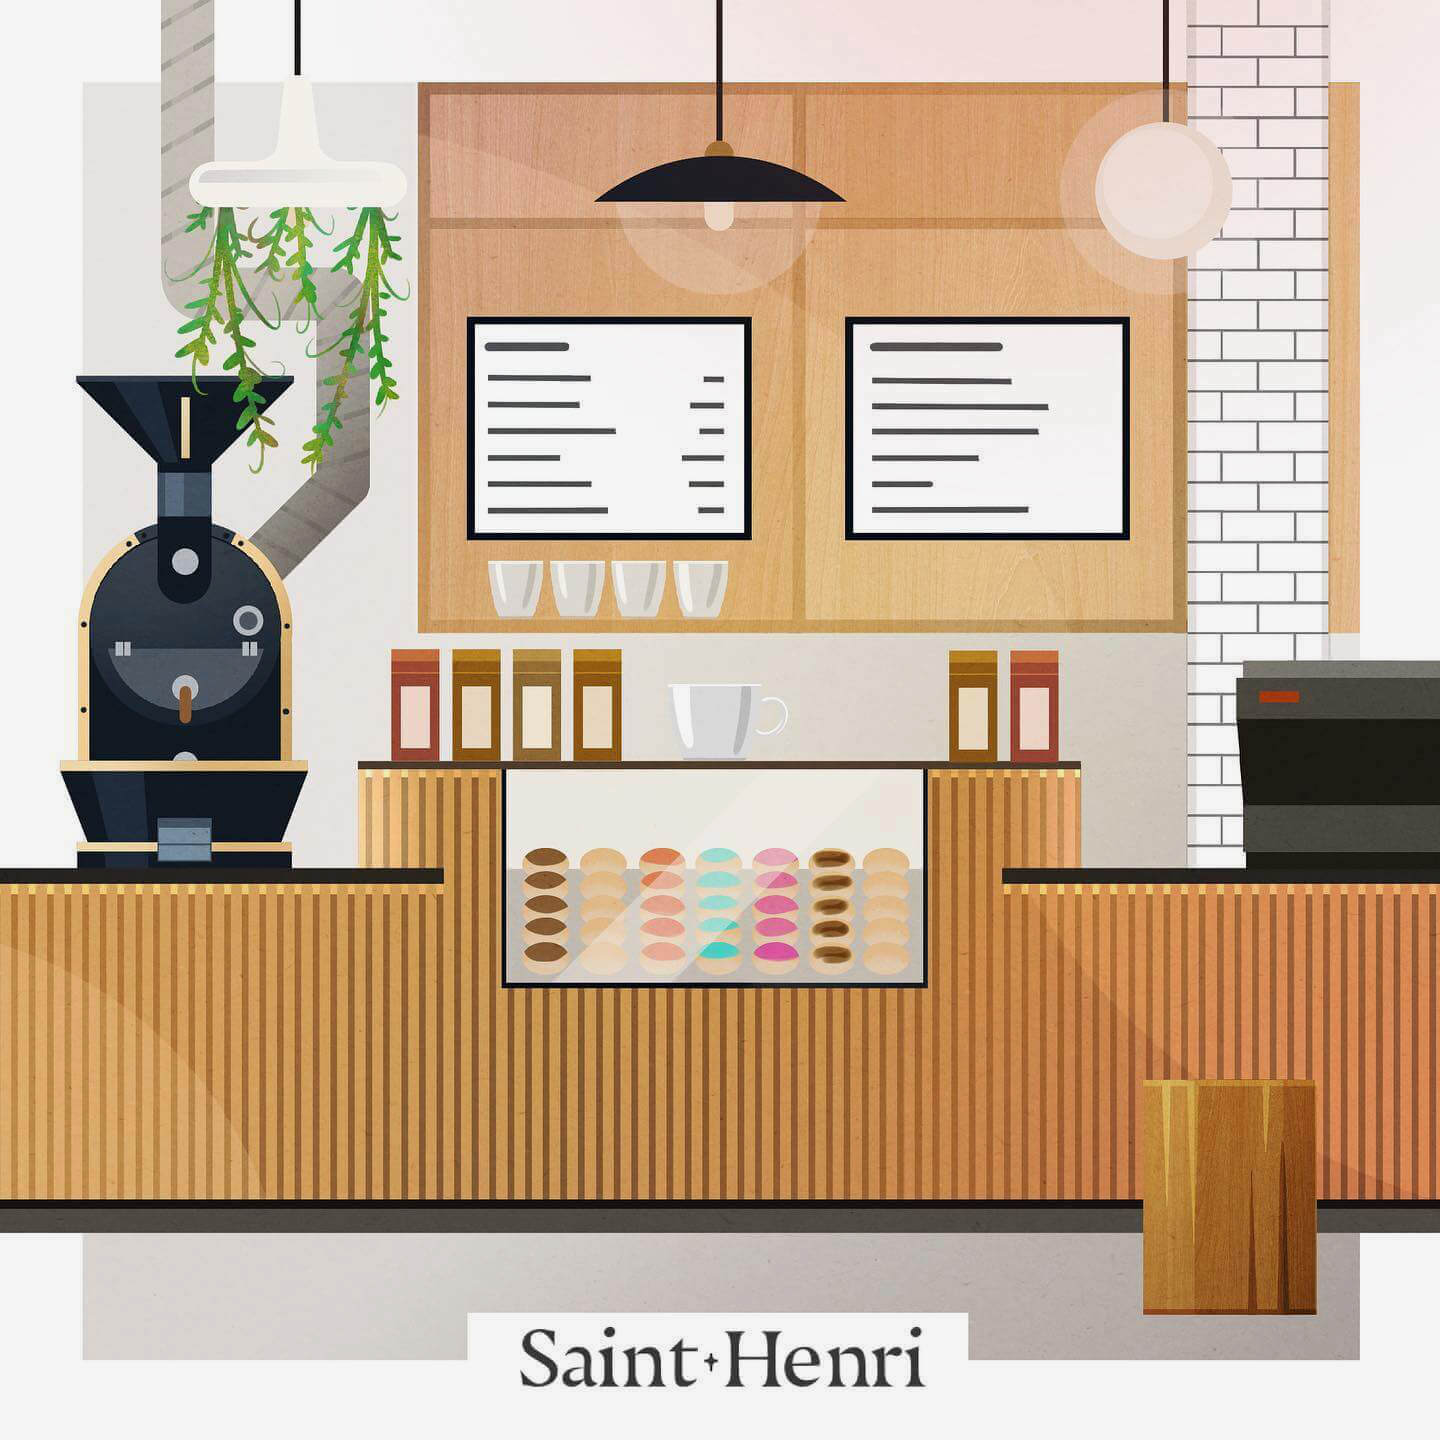 Illustration of a coffee shop